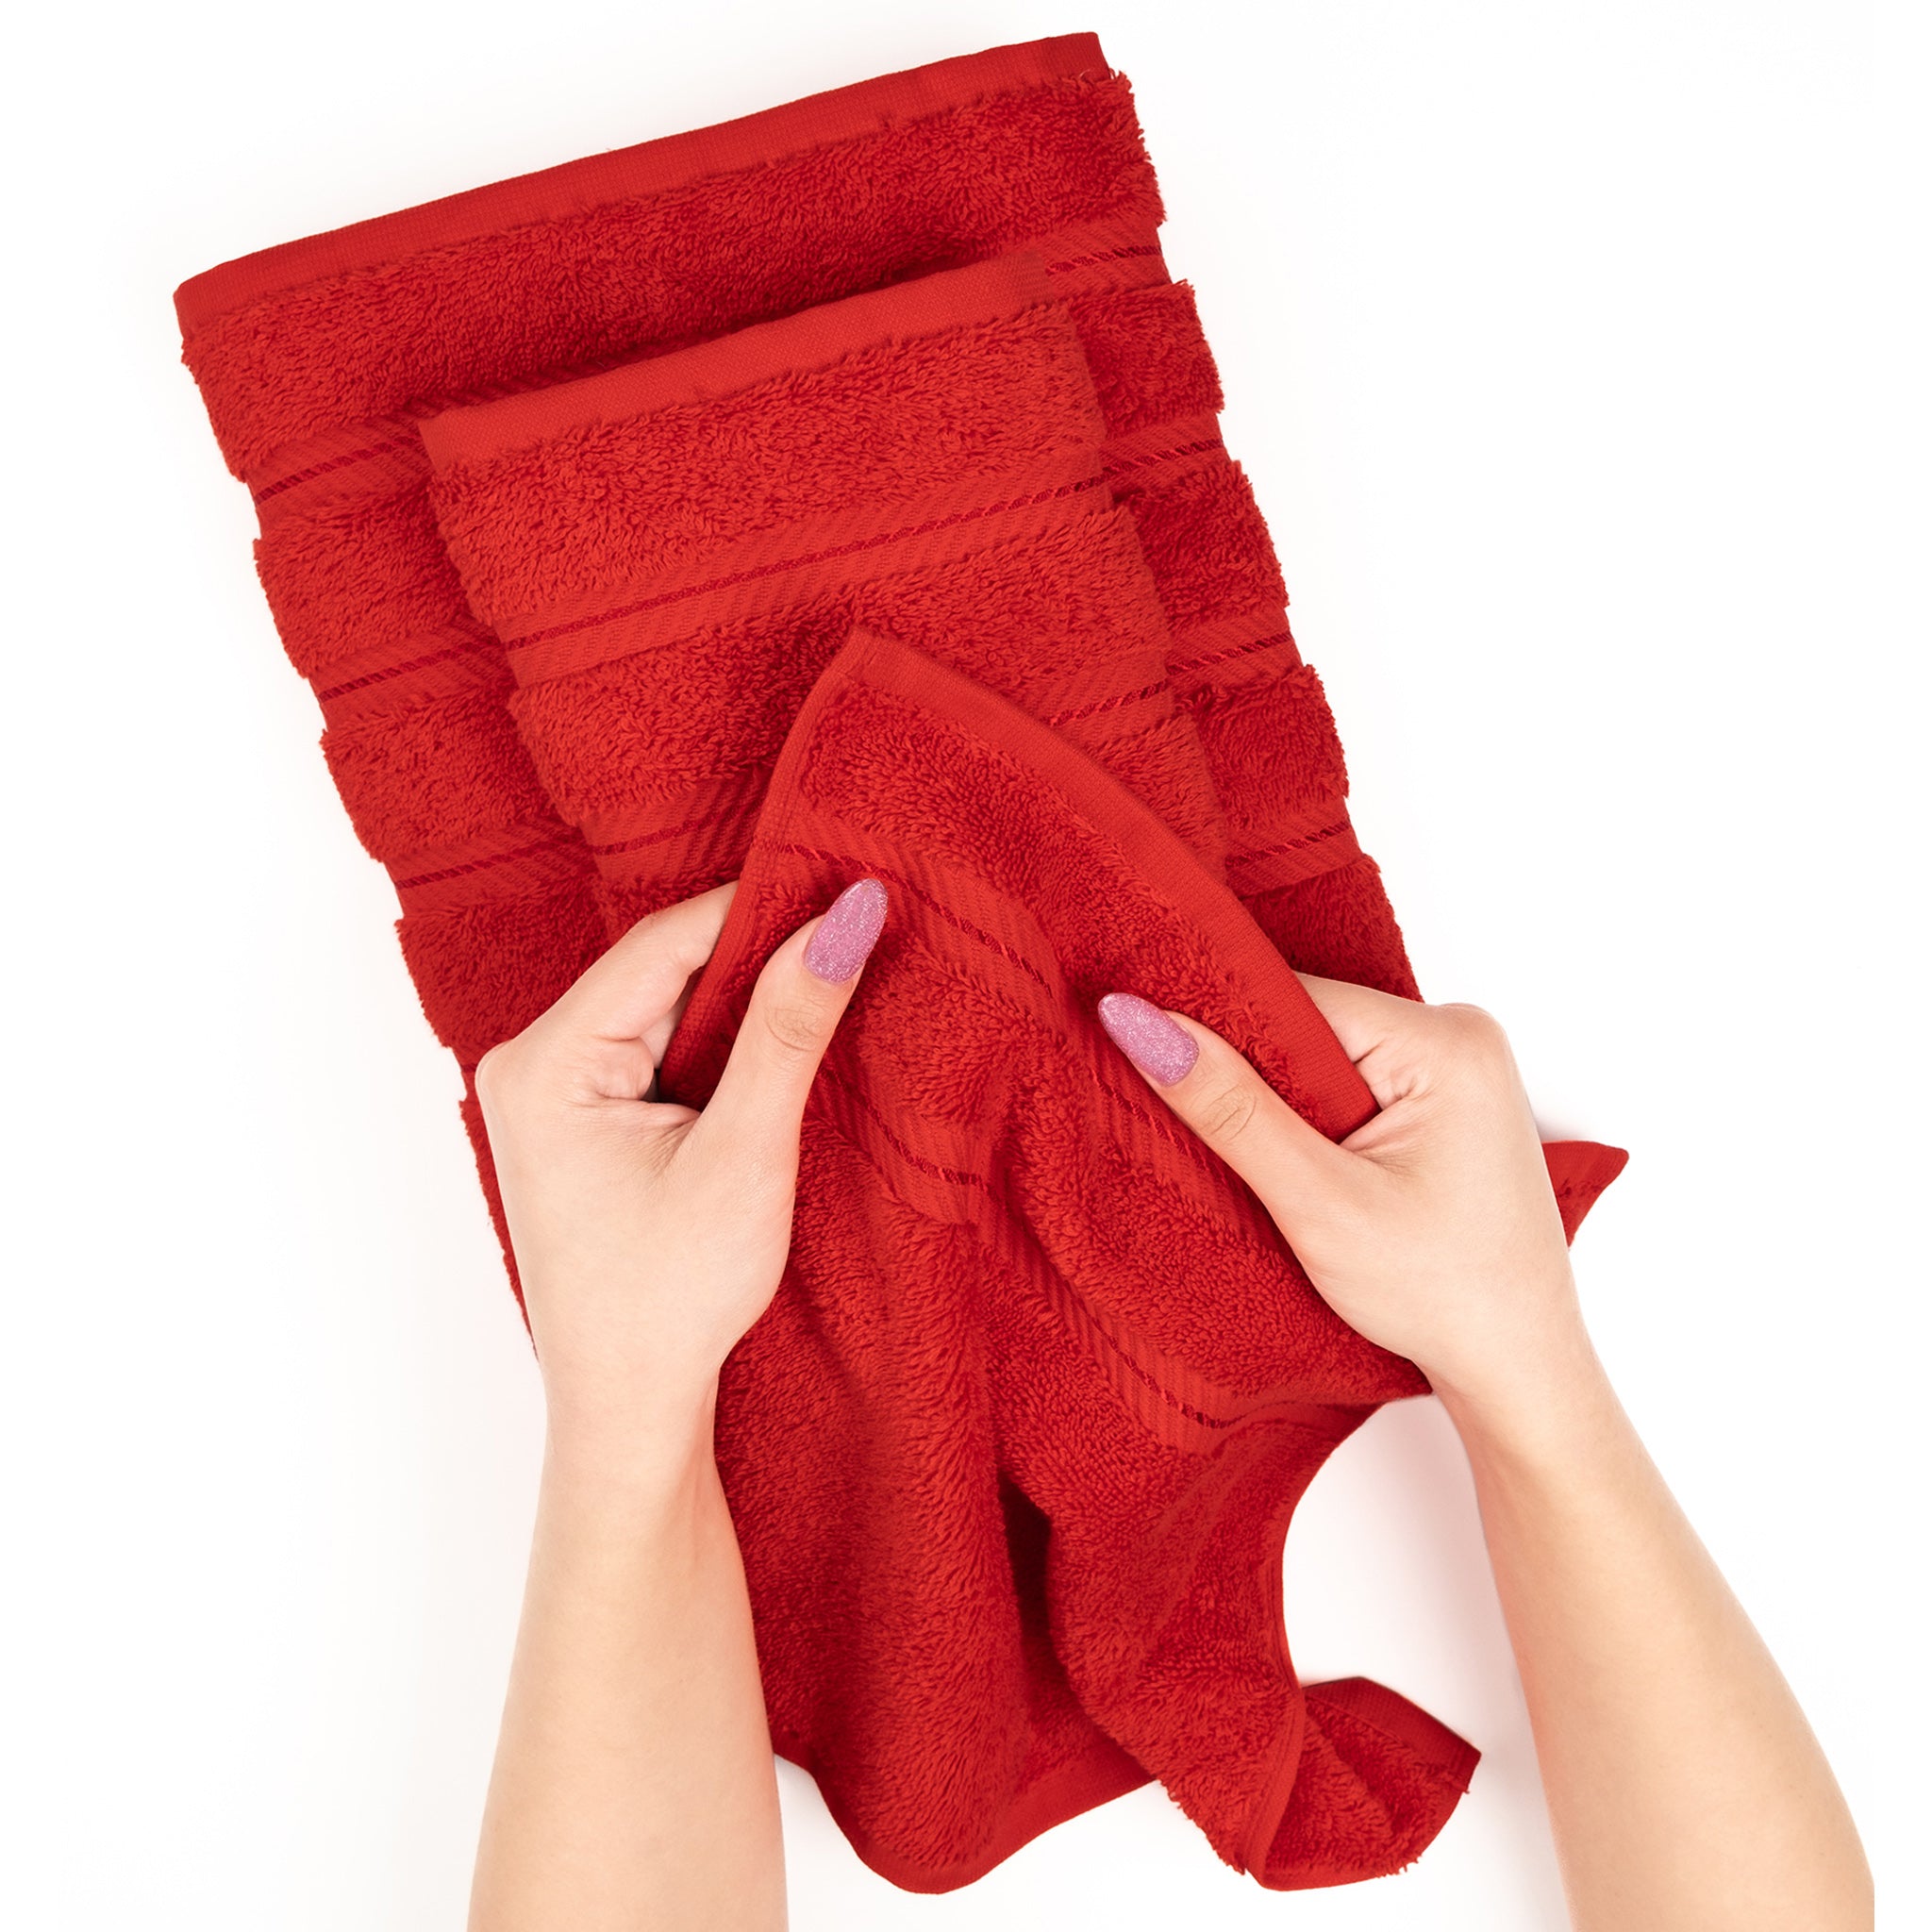 American Soft Linen 100% Turkish Cotton 4 Pack Hand Towel Set Wholesale red-5